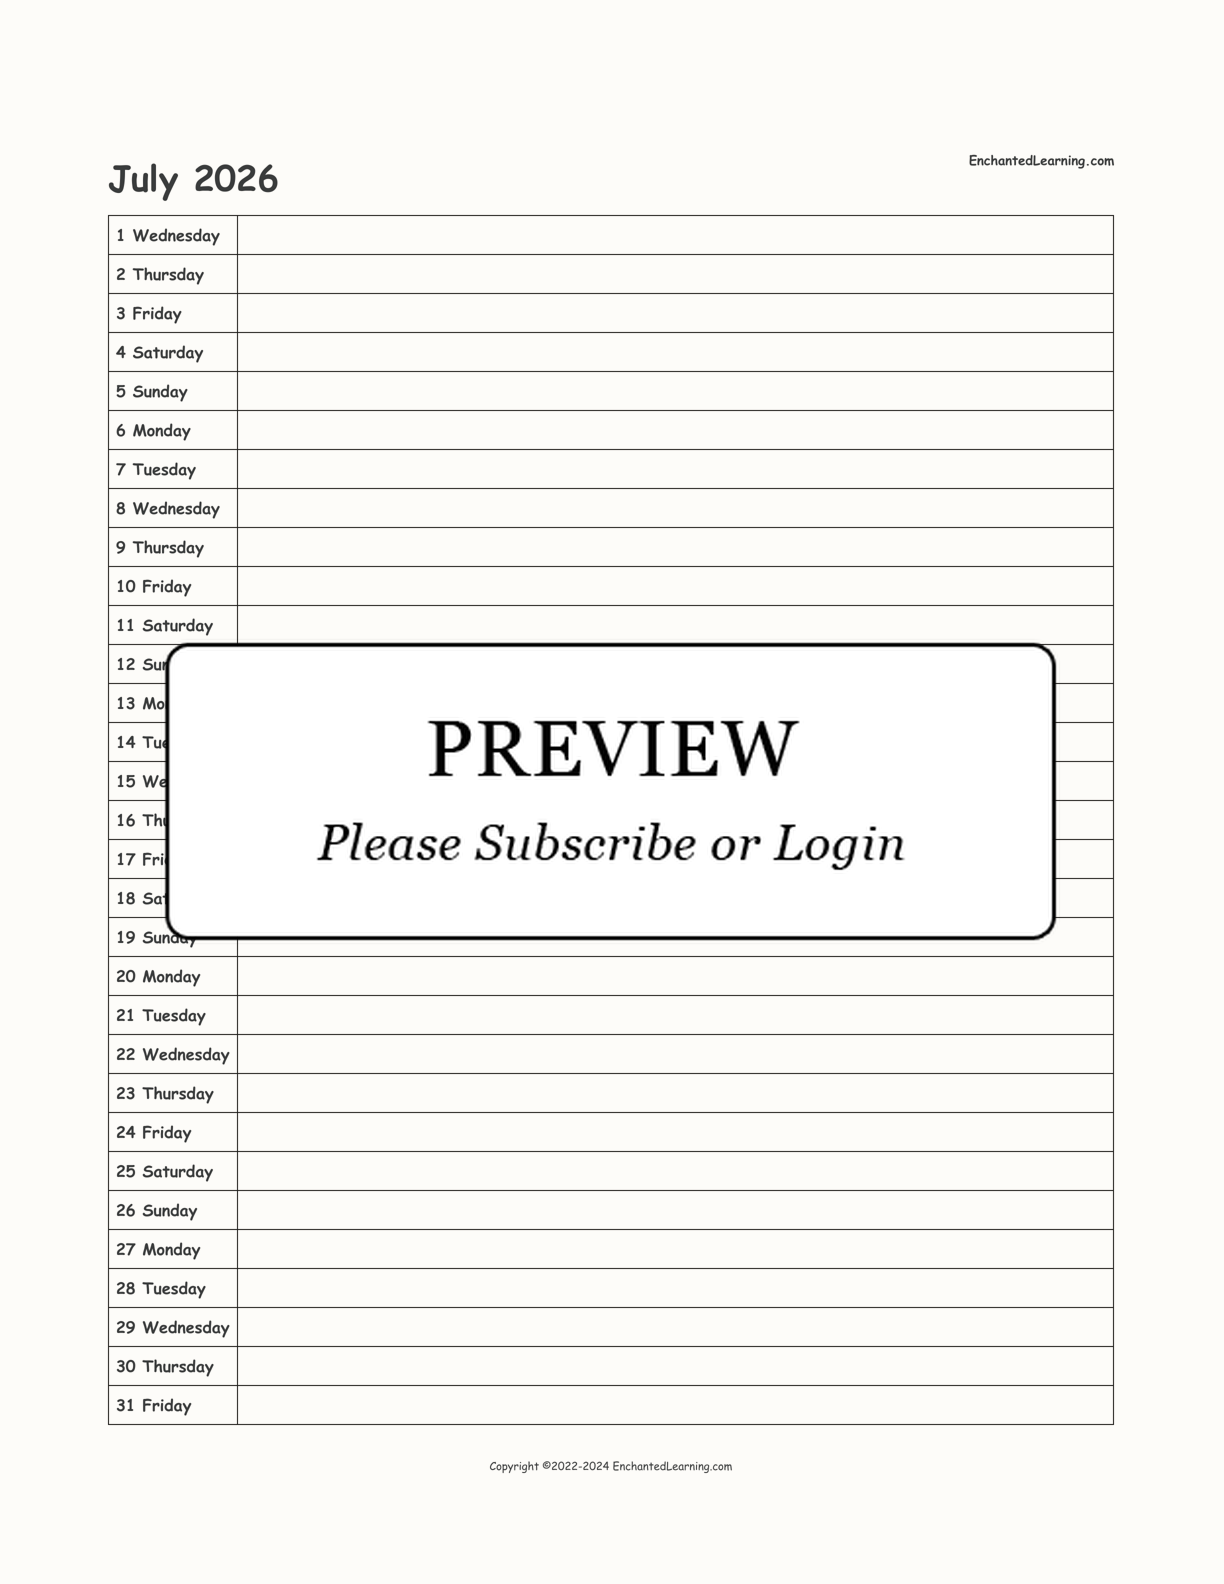 2026 Scheduling Calendar interactive printout page 7